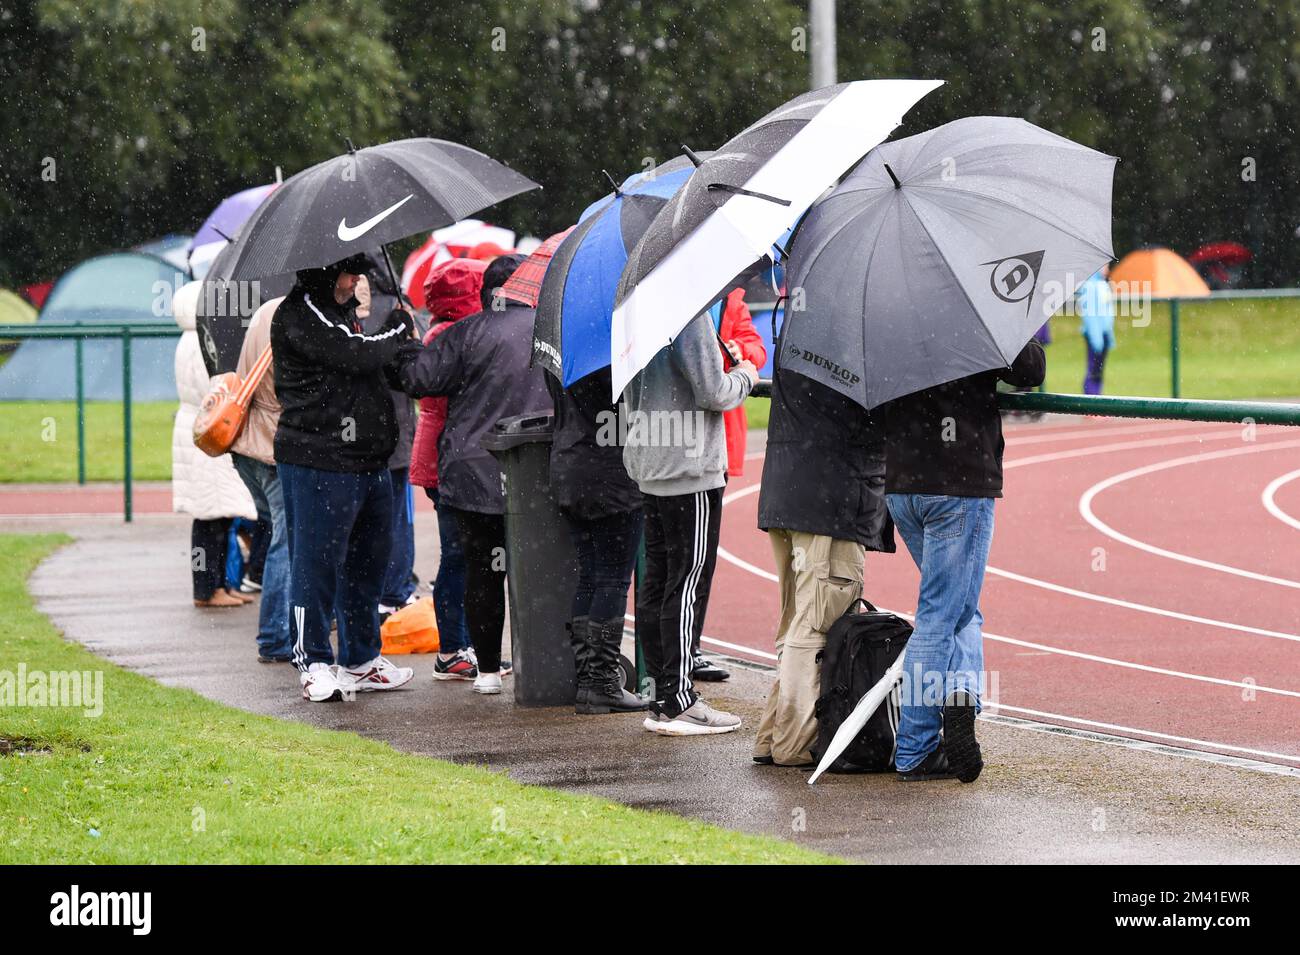 Spectators in the rain at a Junior Athletics Competition Stock Photo